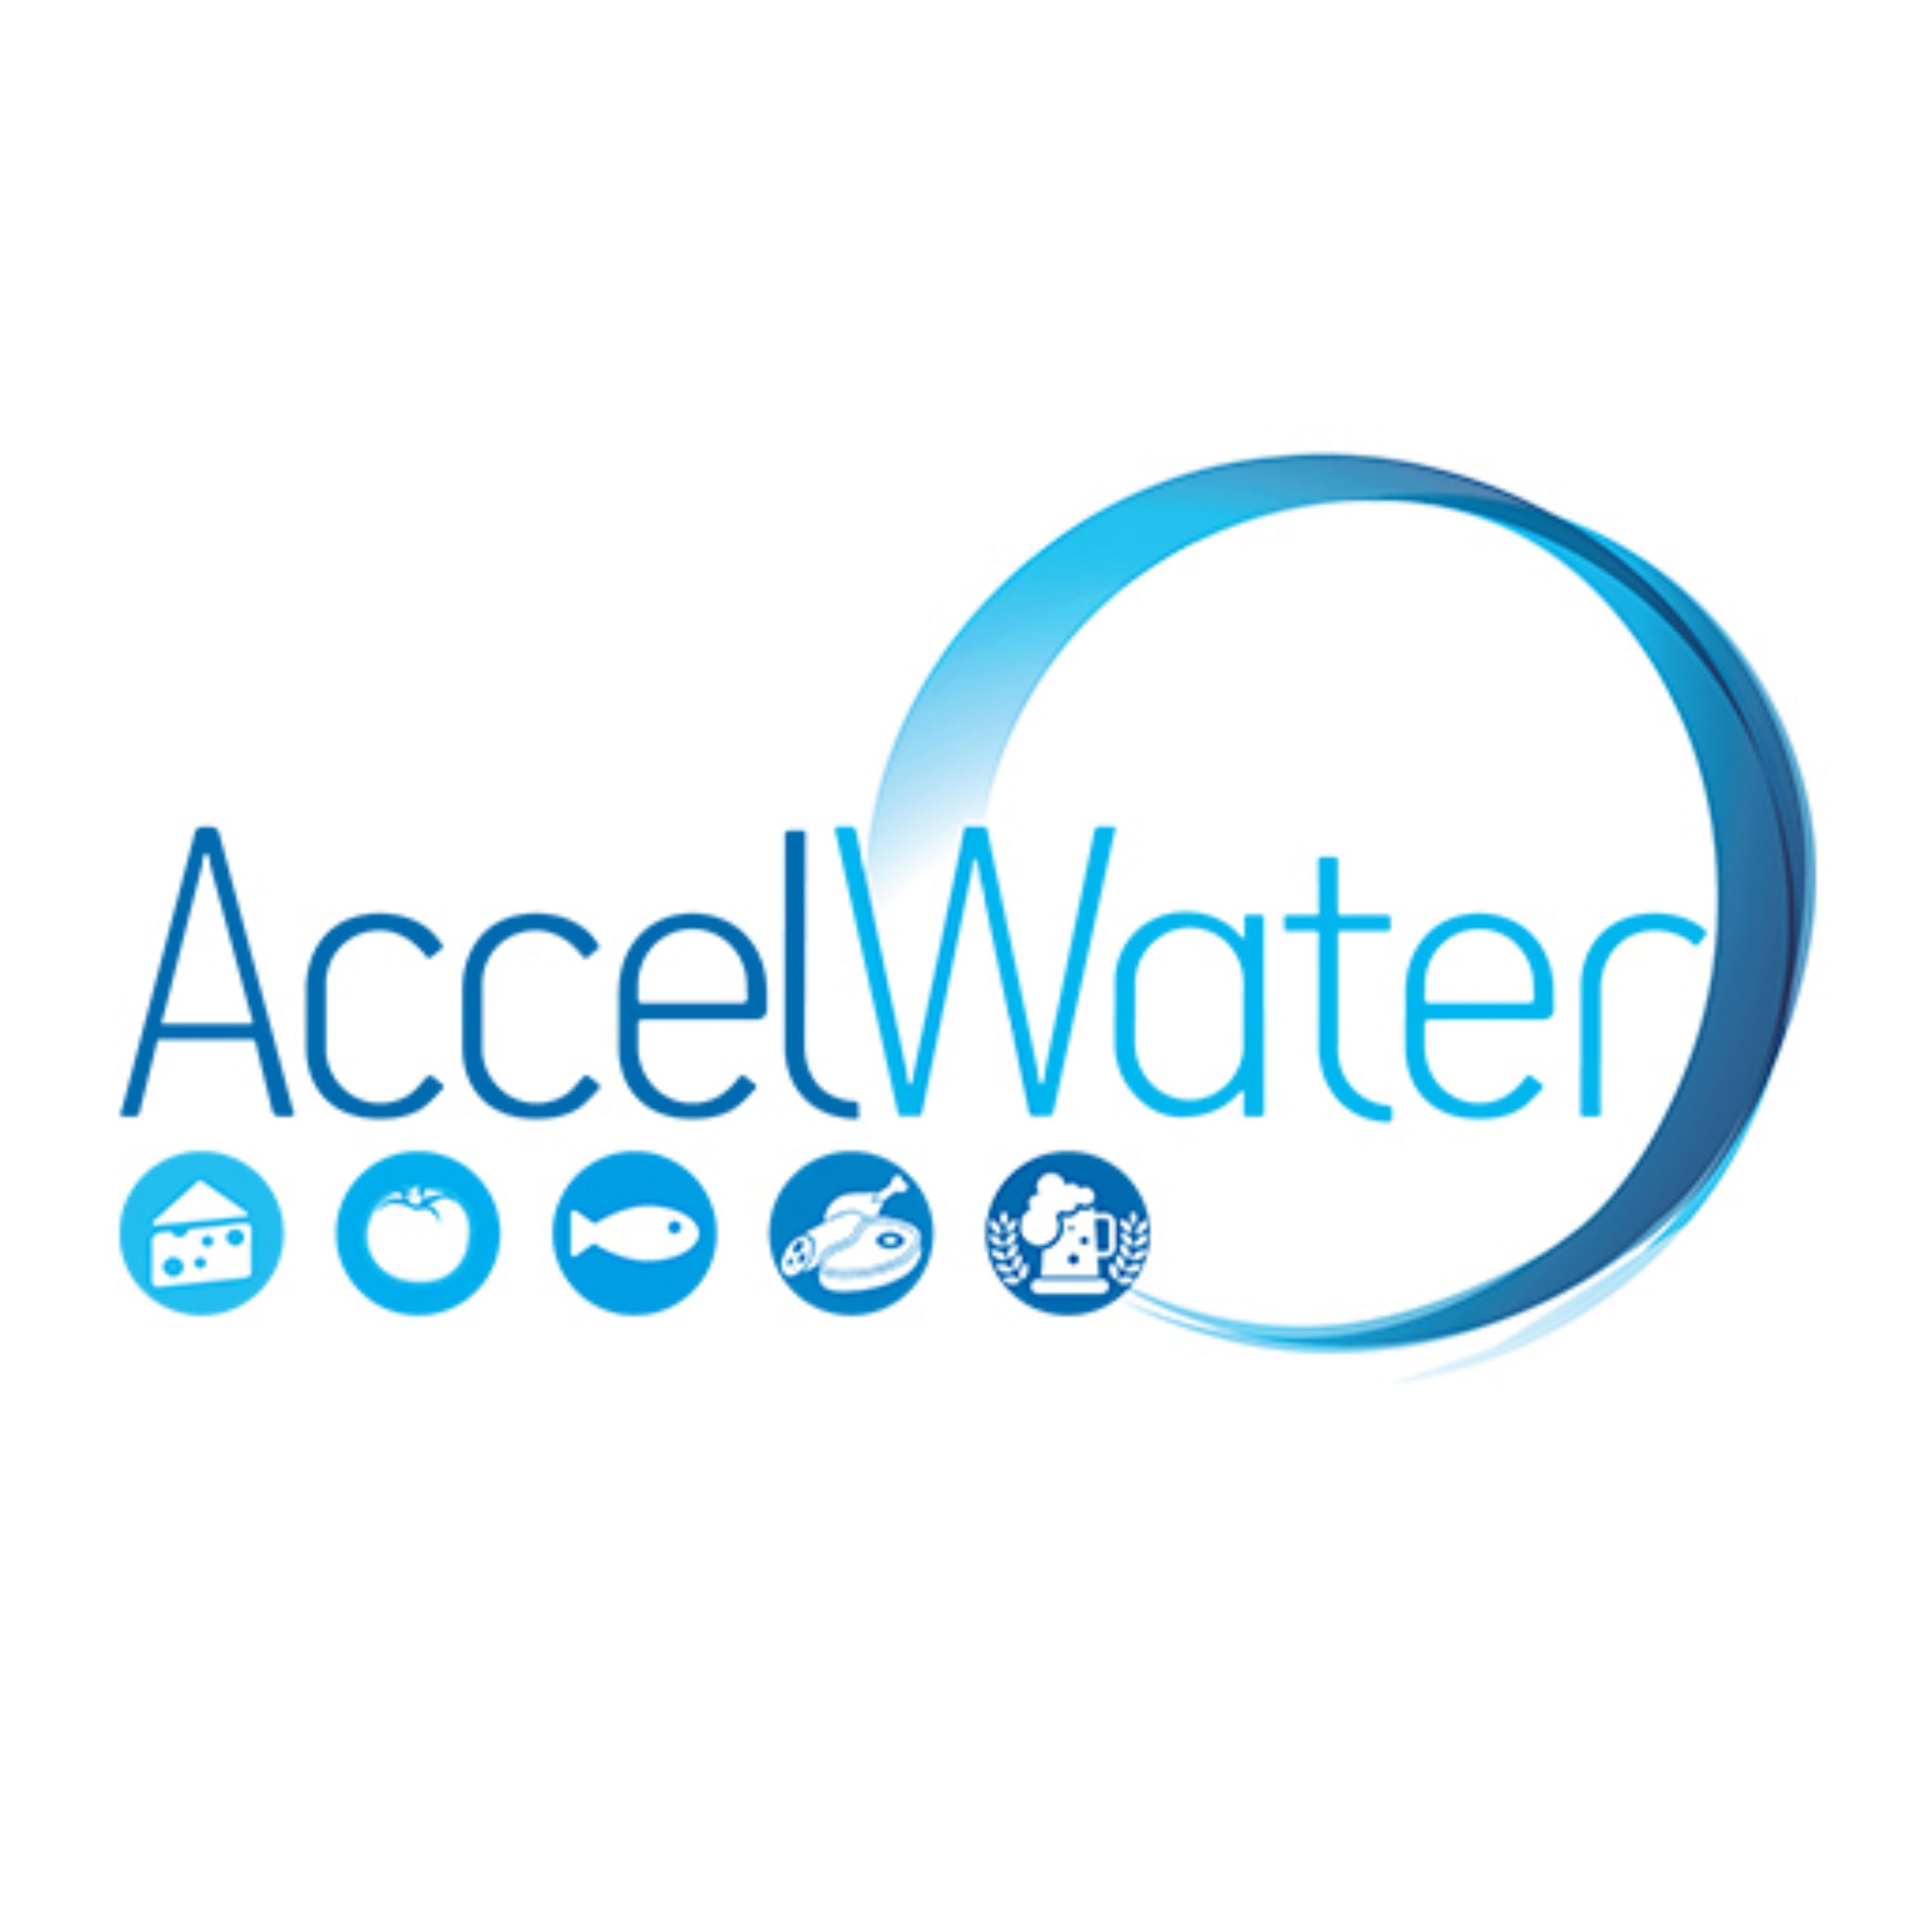 AccelWater: Accelerating Water Circularity in Food and Beverage Industrial Areas around Europe Avatar